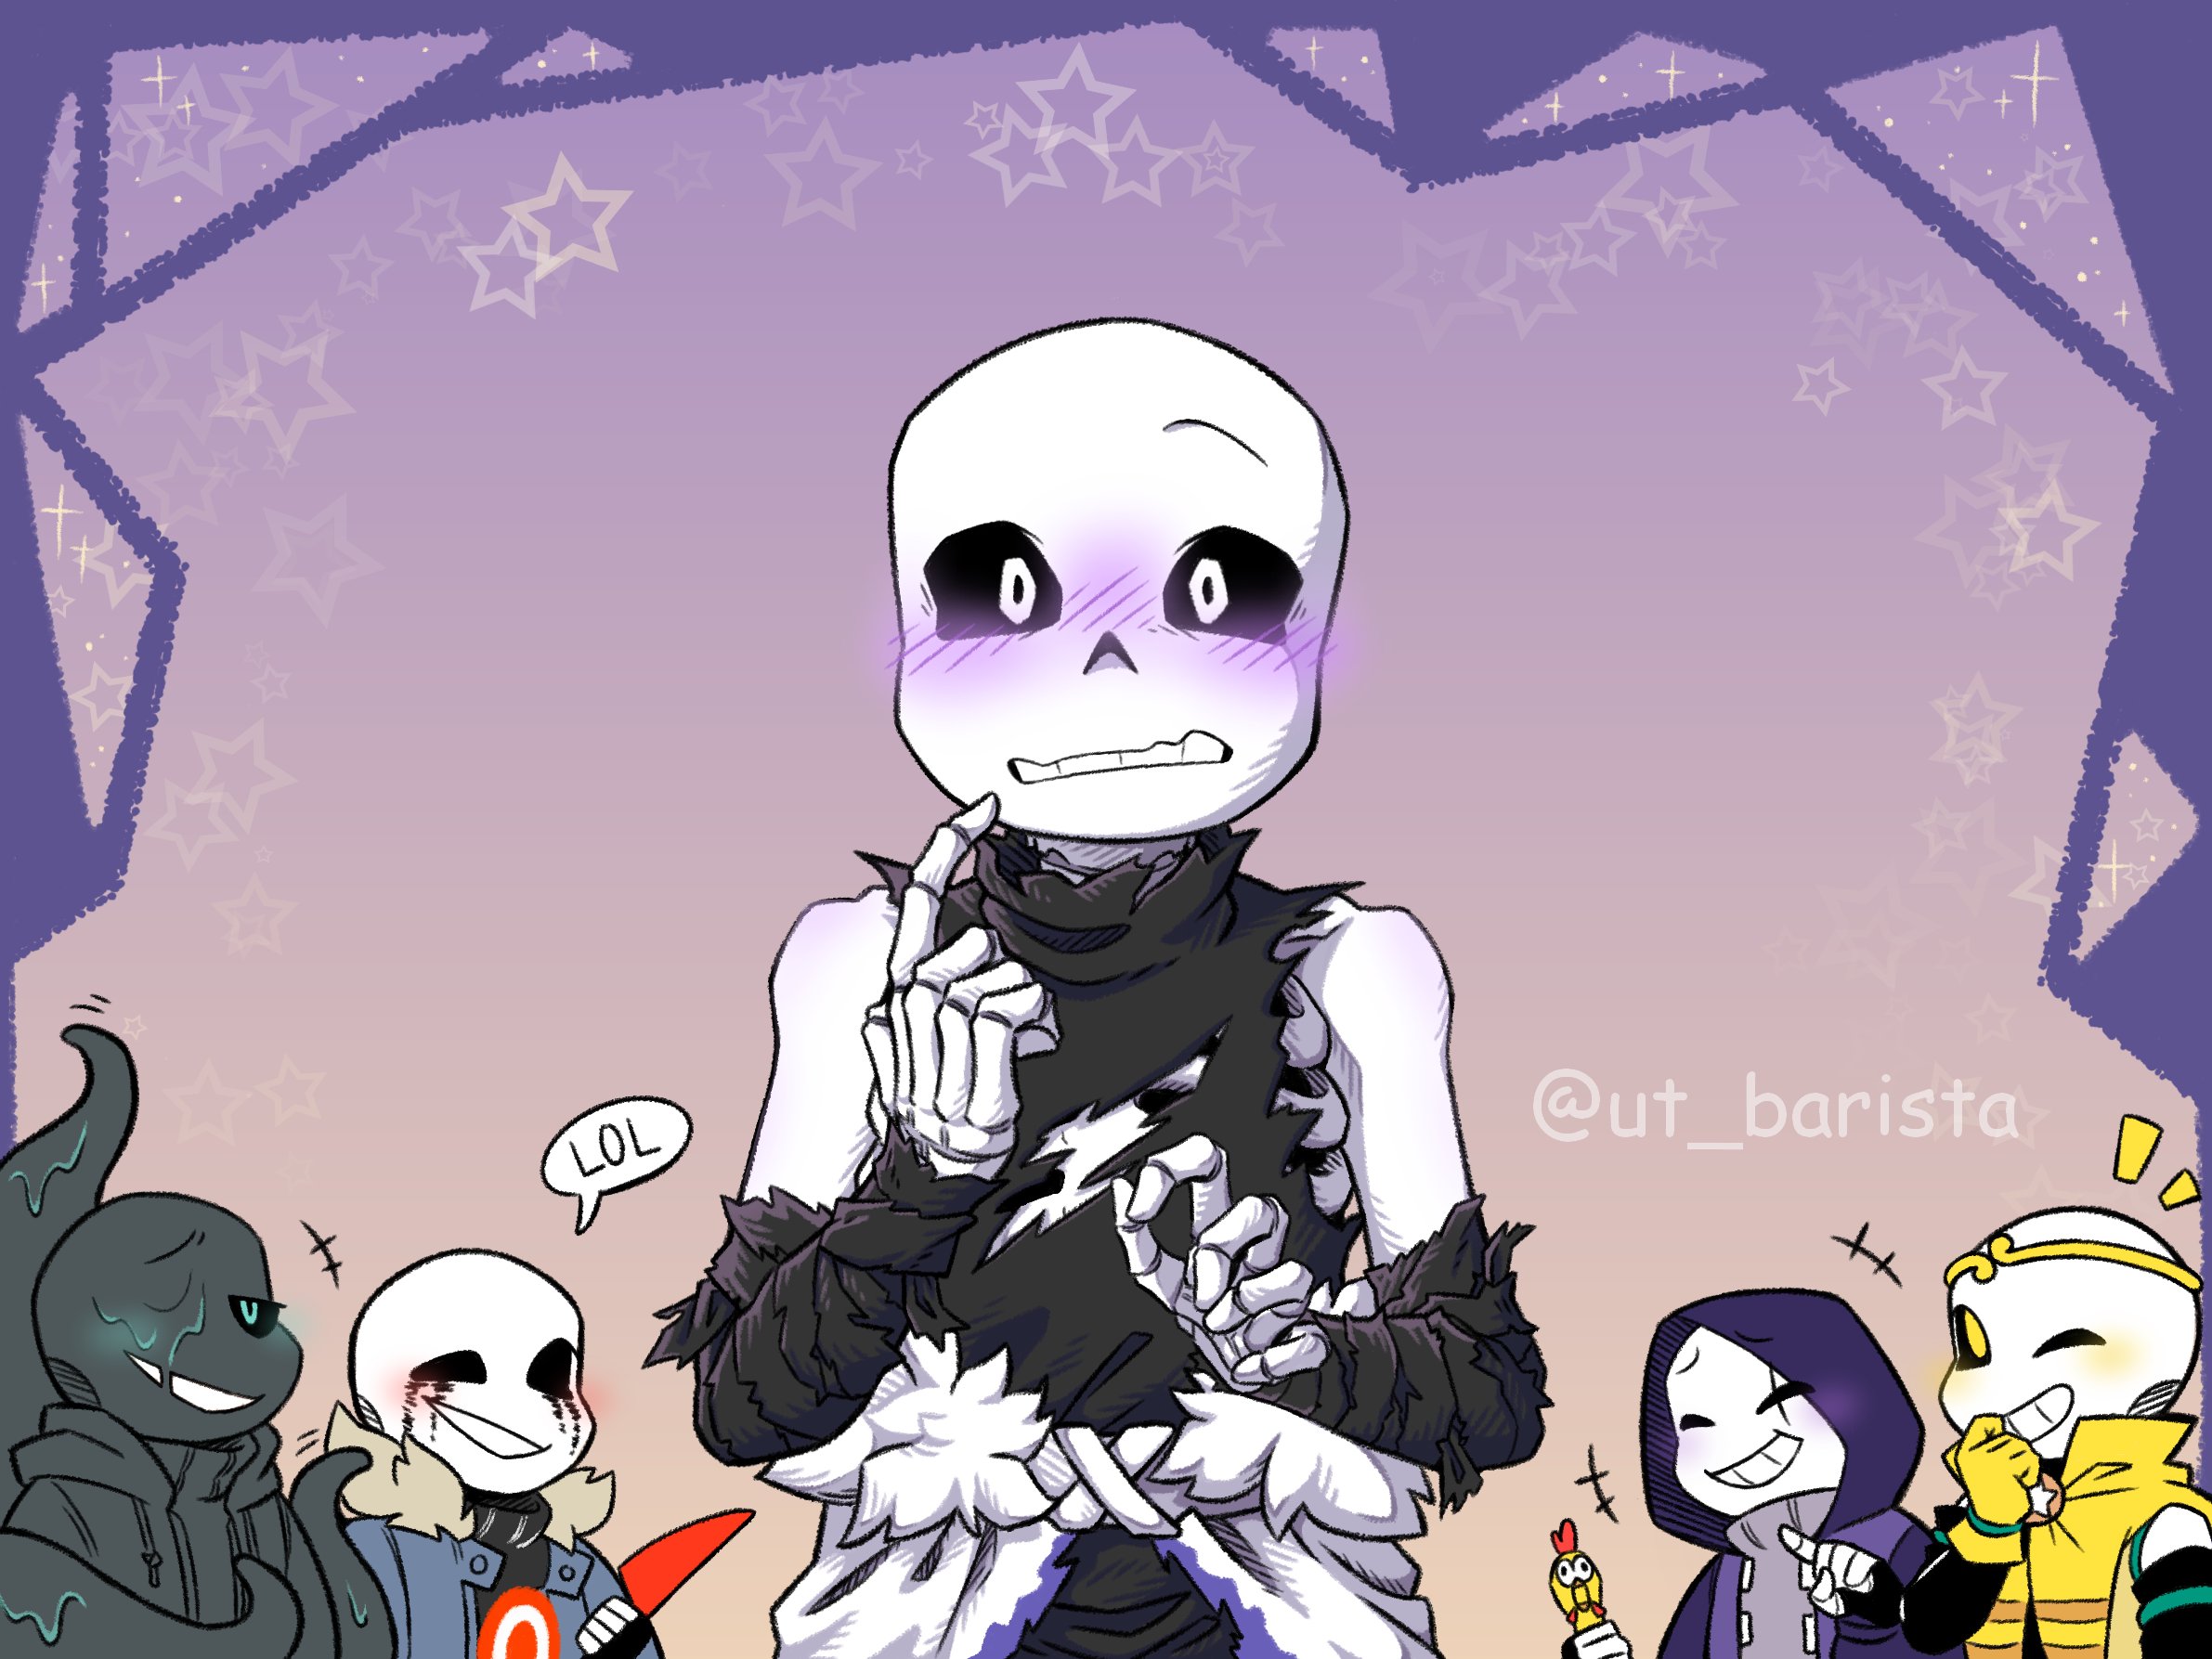 Lucariokm on X: My before and after edits for @Roxanne97801020 's Cross  outfit. Happy belated birthday Cross and Jael.~ Keep up the great work~  #sansdoll @sansdoll @jaelarteo #undertale #sans #cross #xtale #Inktober2019  #